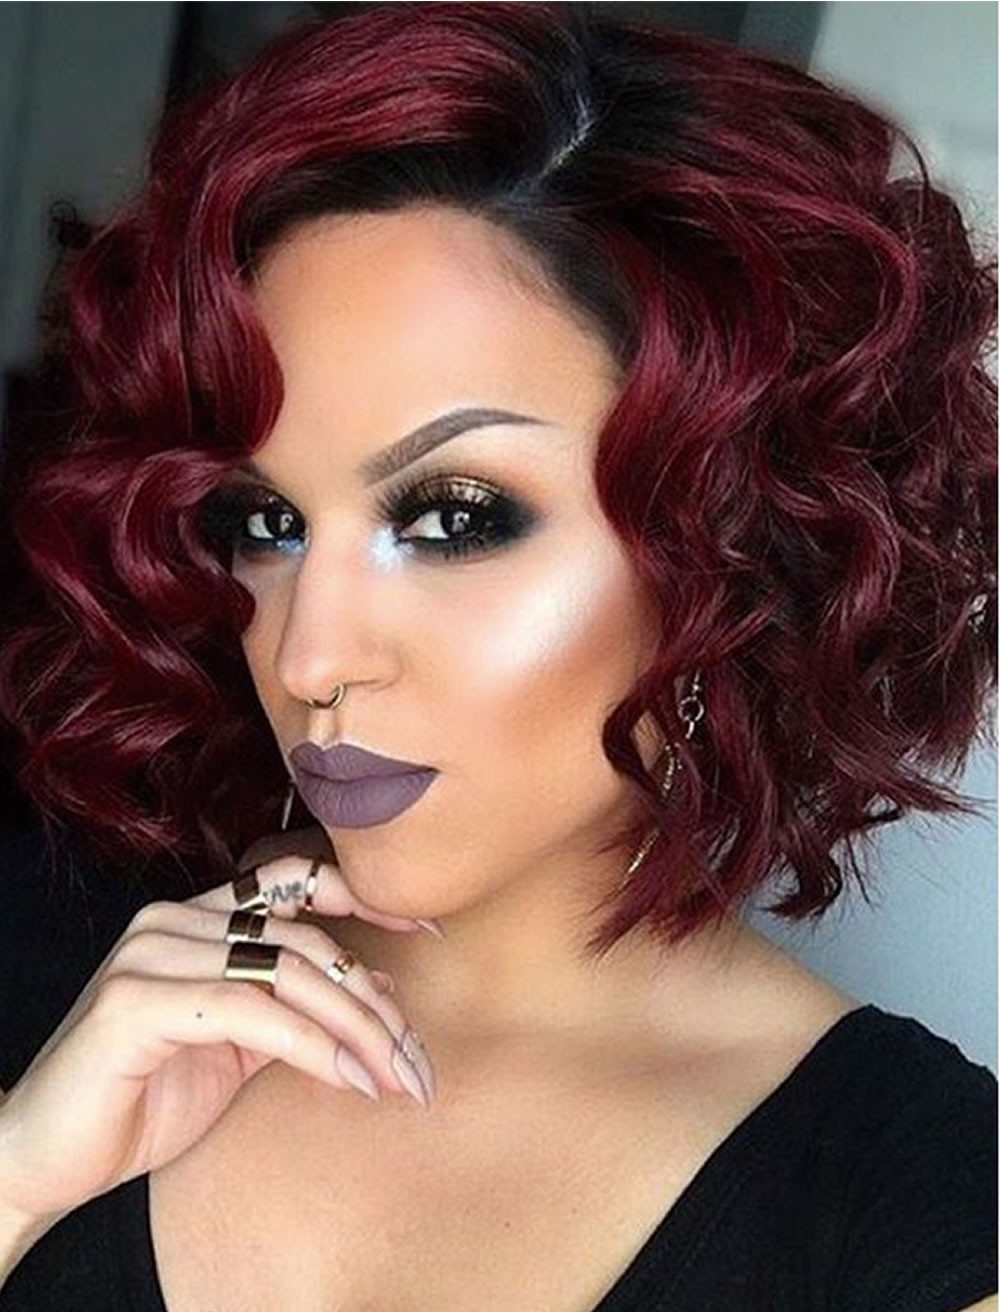 Curling Bob Hairstyle
 2018 Curly Bob Hairstyles for Women – 17 Perfect Short